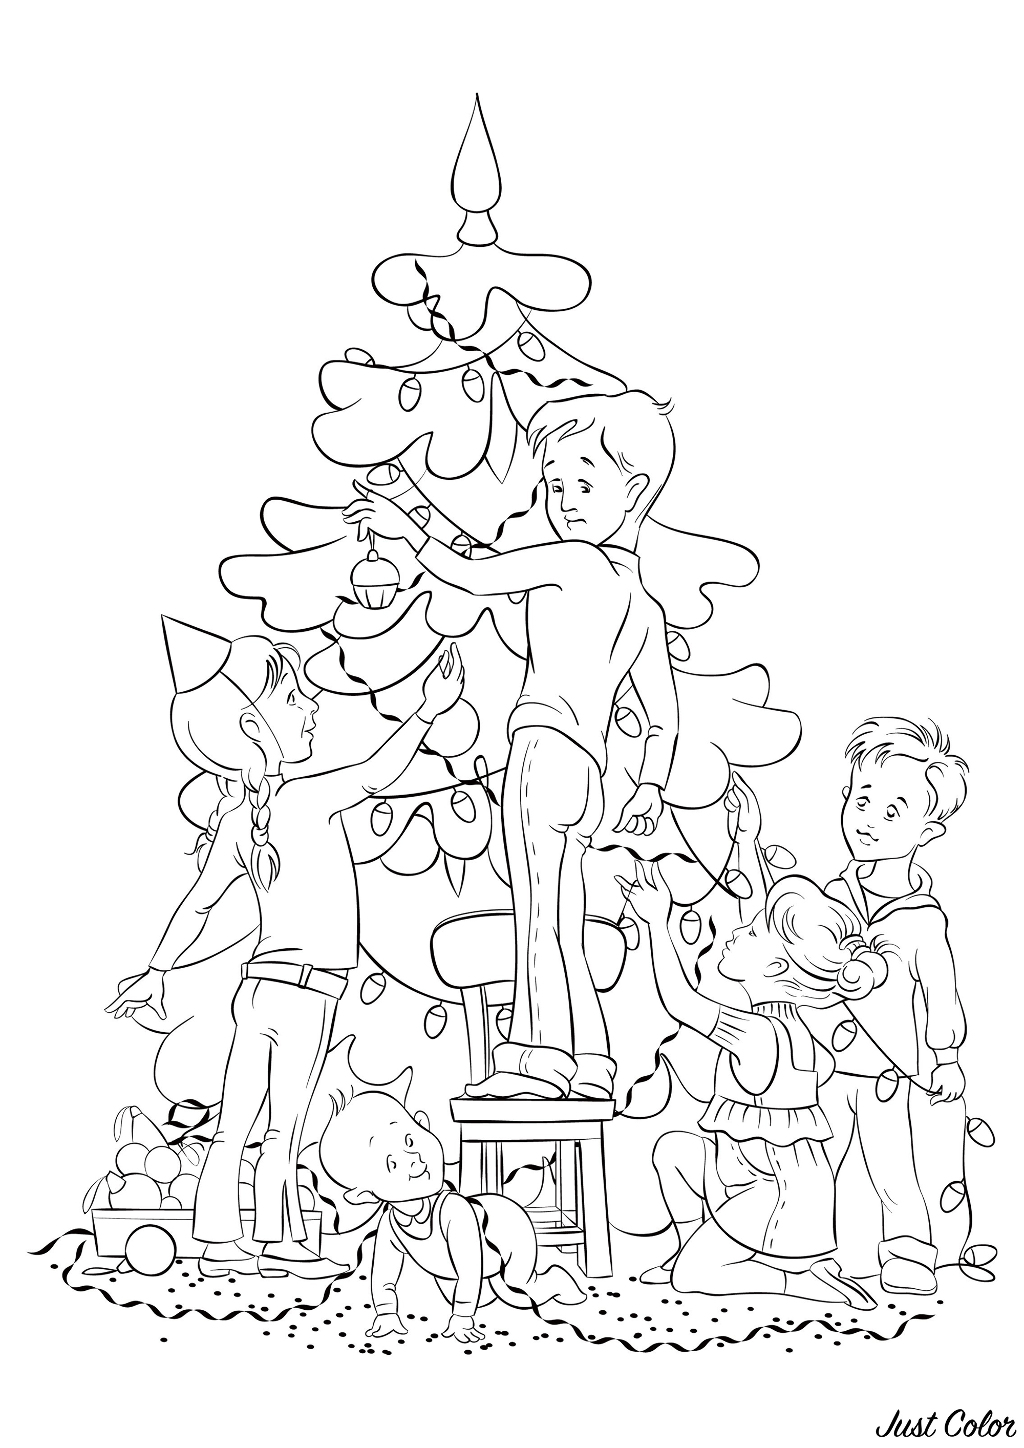 Coloring page representing children of all ages decorating a Christmas tree